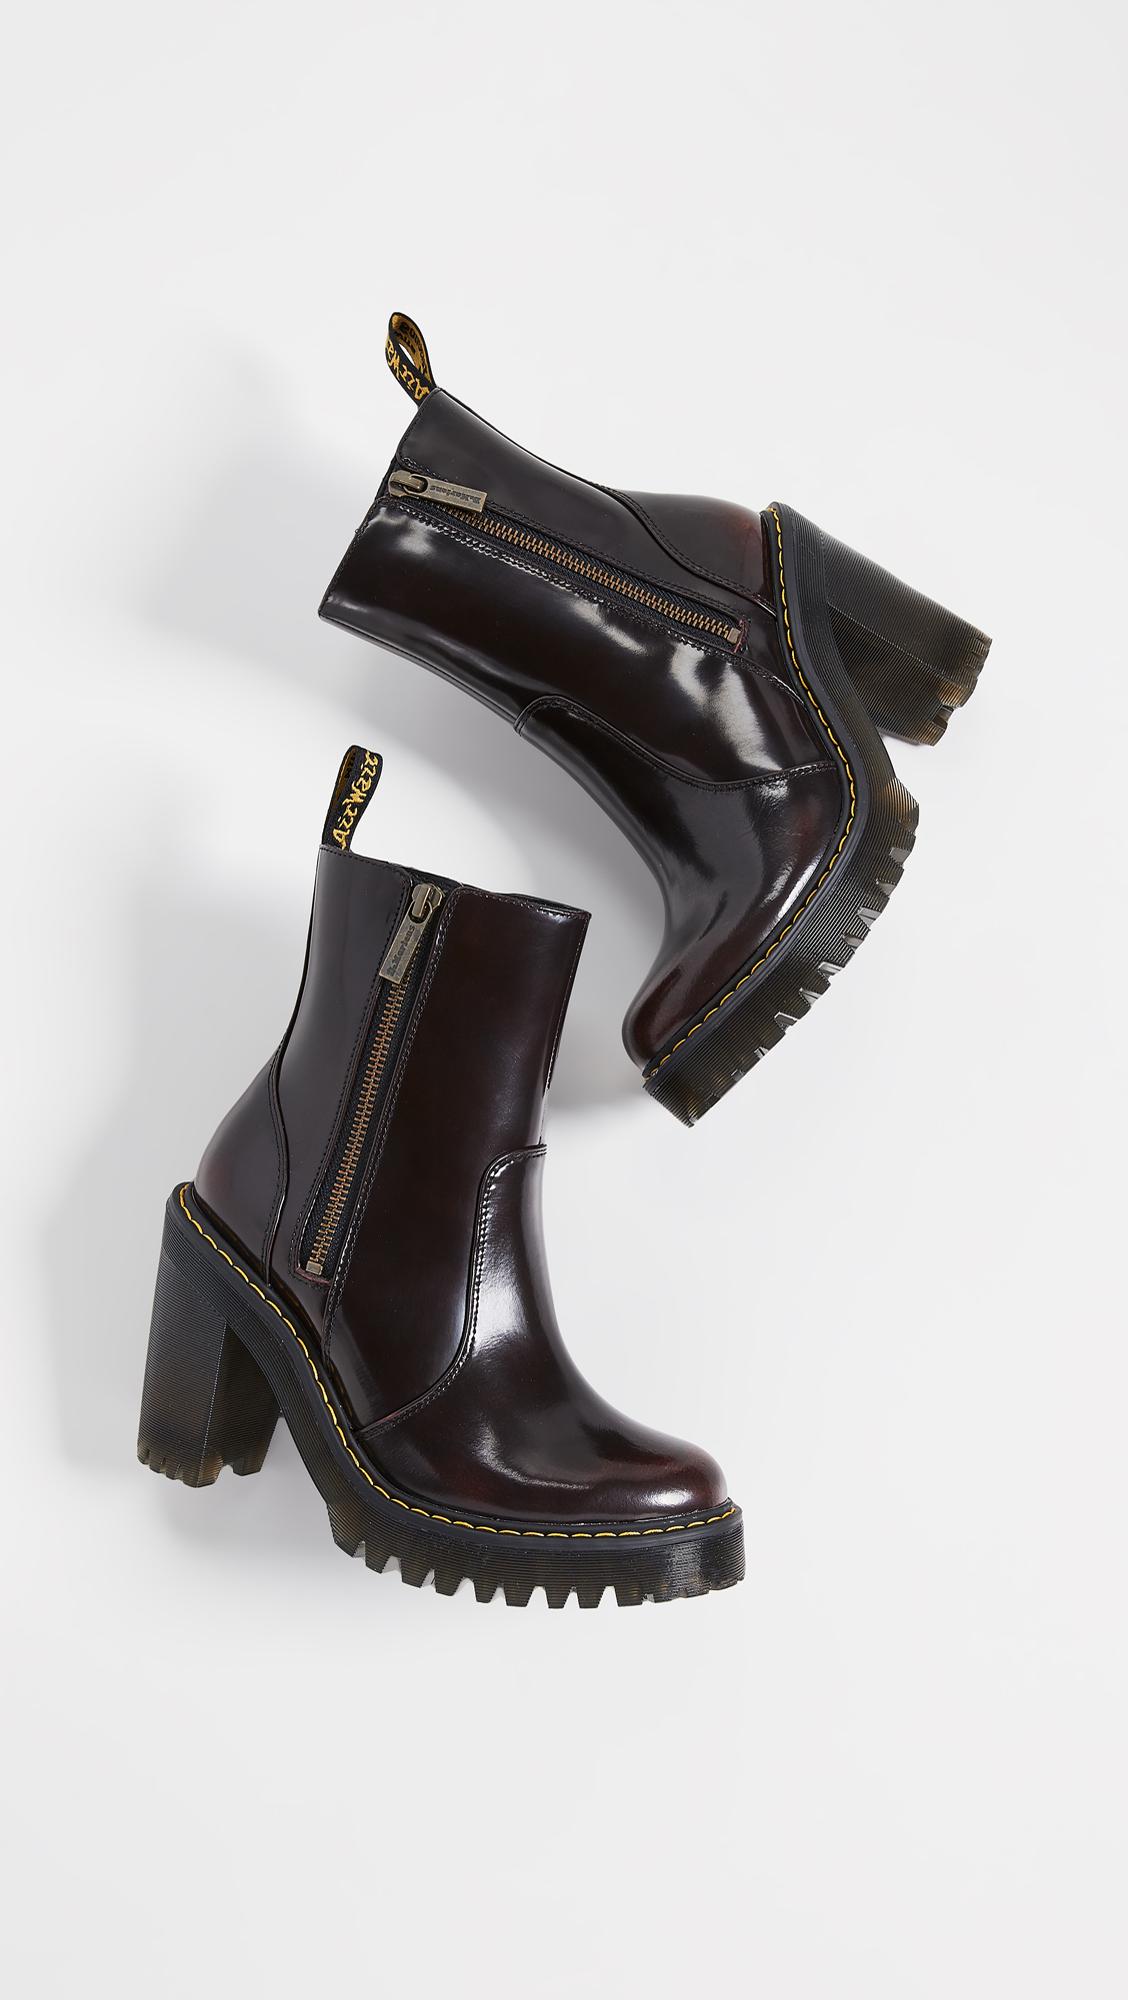 Dr. Martens Magdalena Ii Ankle Boots in Black | Lyst